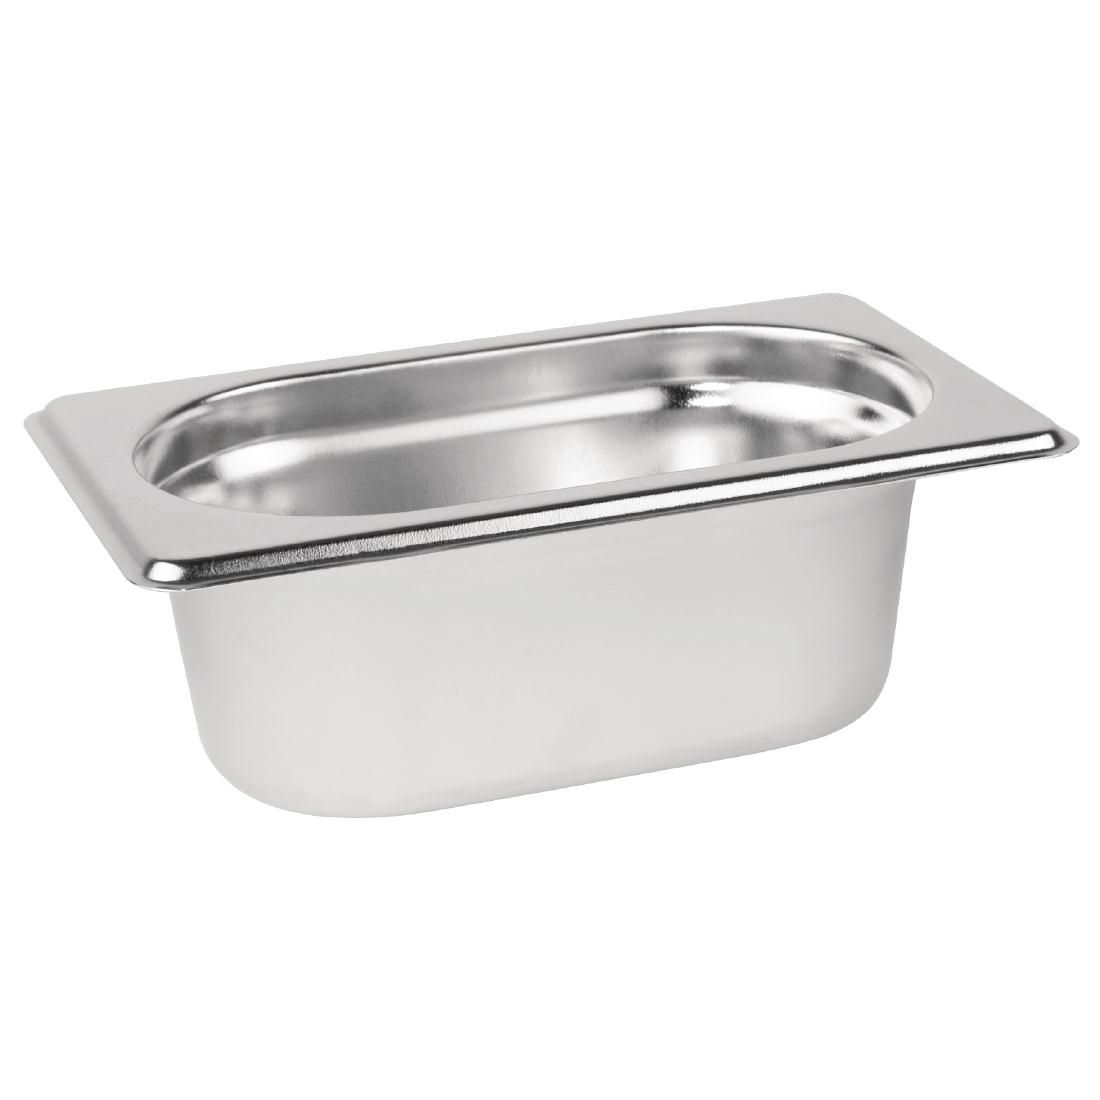 Ǔ Vogue Stainless Steel 1/9 Gastronorm Tray 65mm